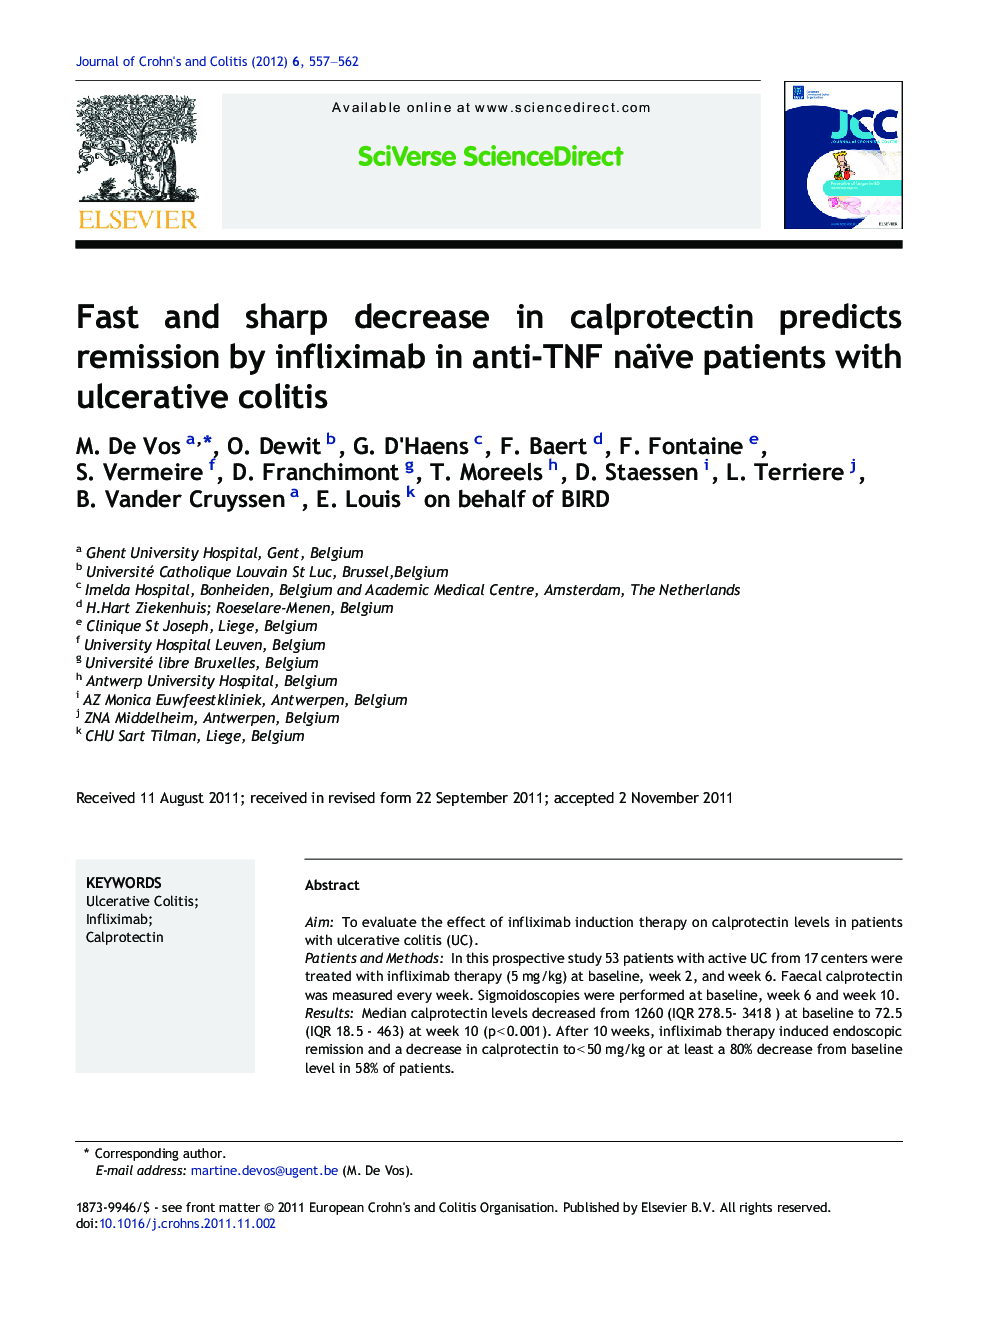 Fast and sharp decrease in calprotectin predicts remission by infliximab in anti-TNF naïve patients with ulcerative colitis